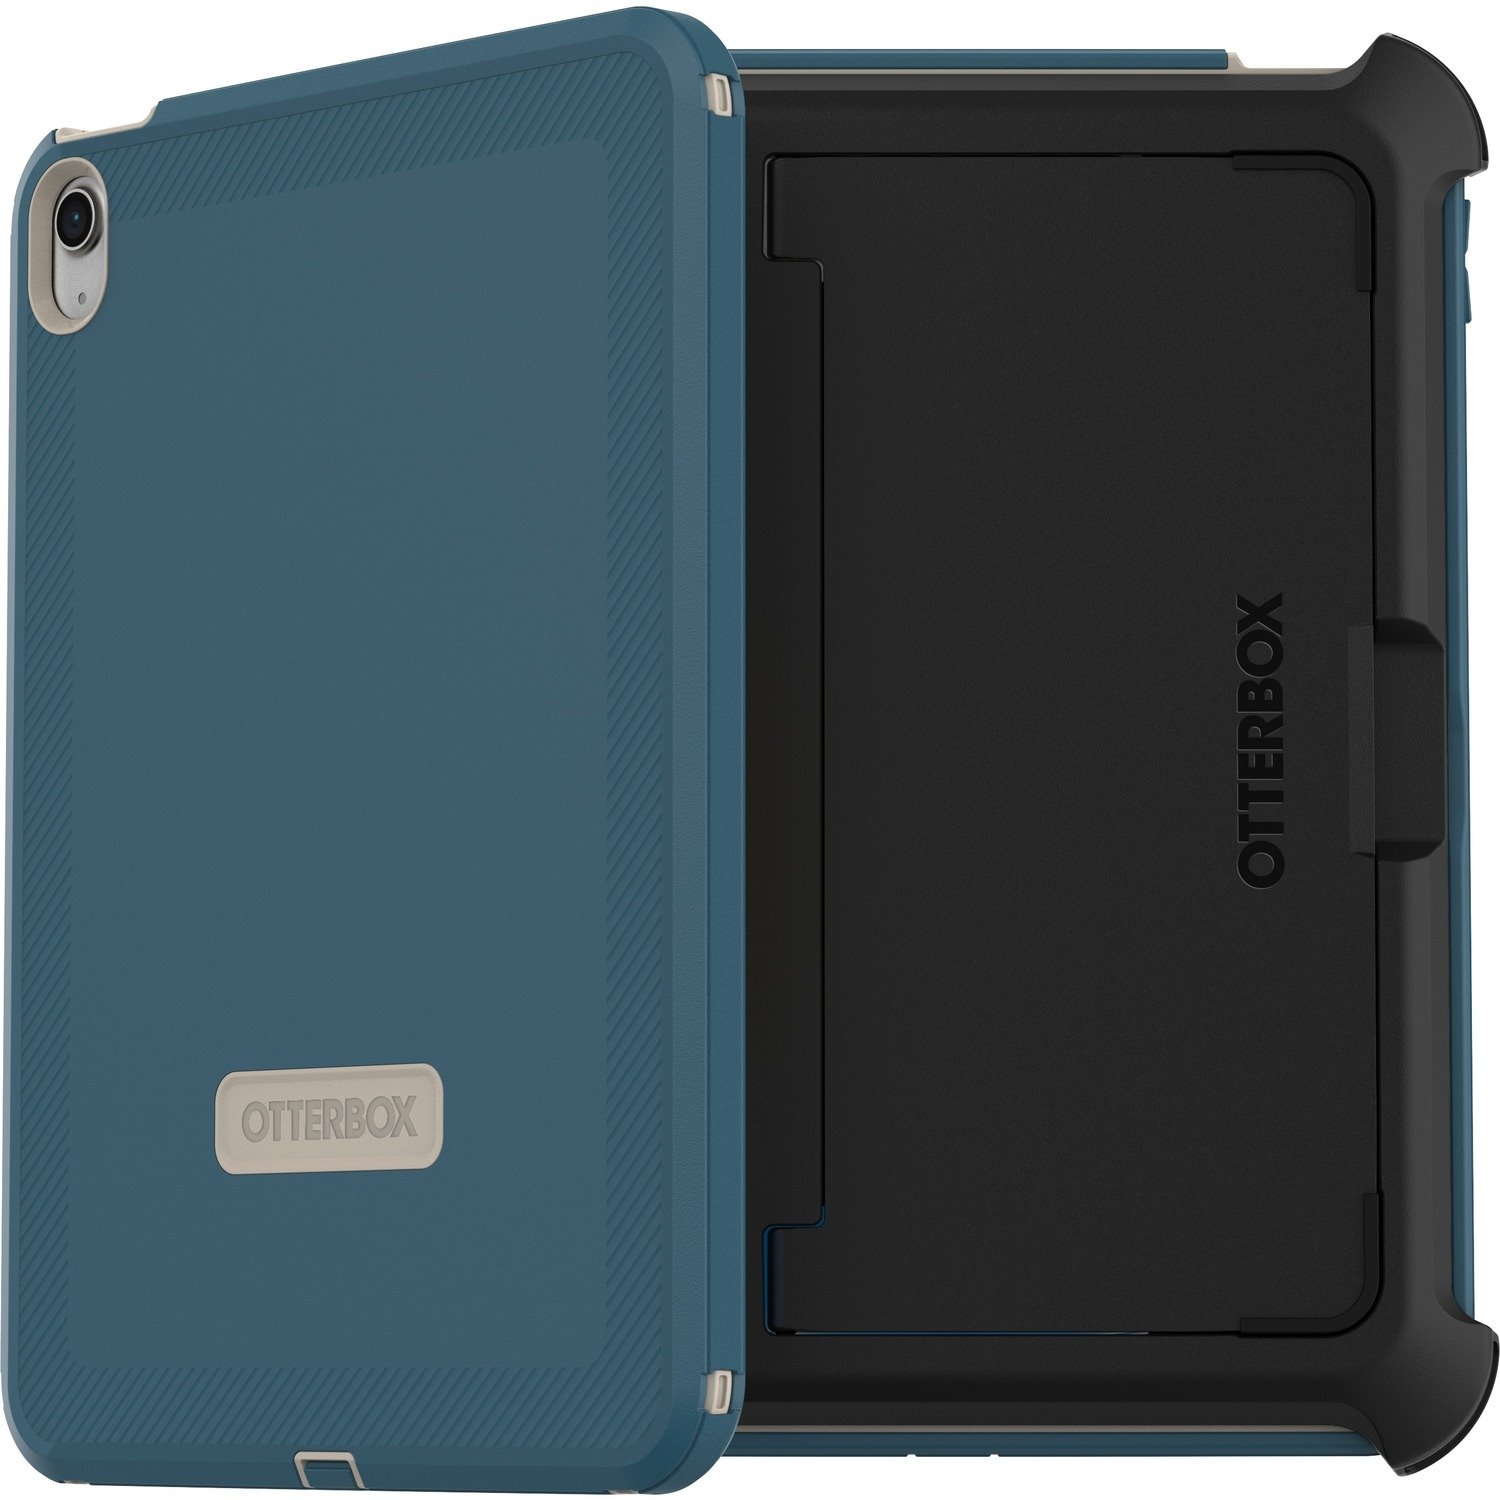 OtterBox Defender Case for Apple iPad Tablet